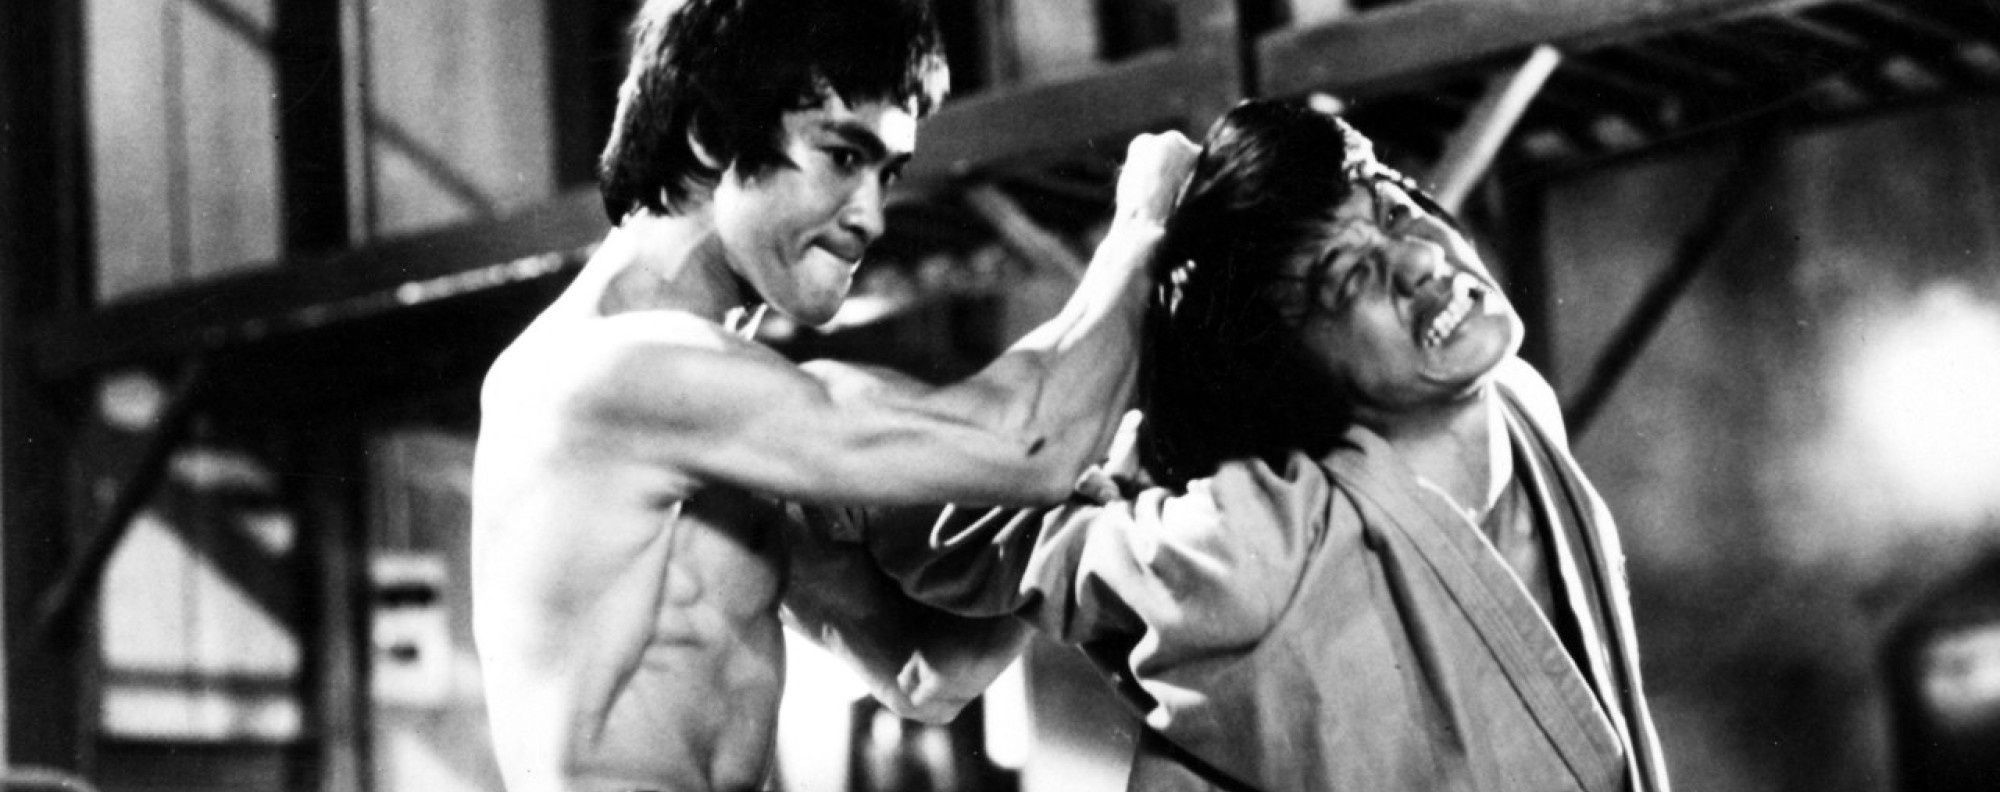 What a Moment in Cinema History!”: Resurfaced Image of Bruce Lee and Jackie  Chan in Action Leaves Fans Nostalgic - EssentiallySports